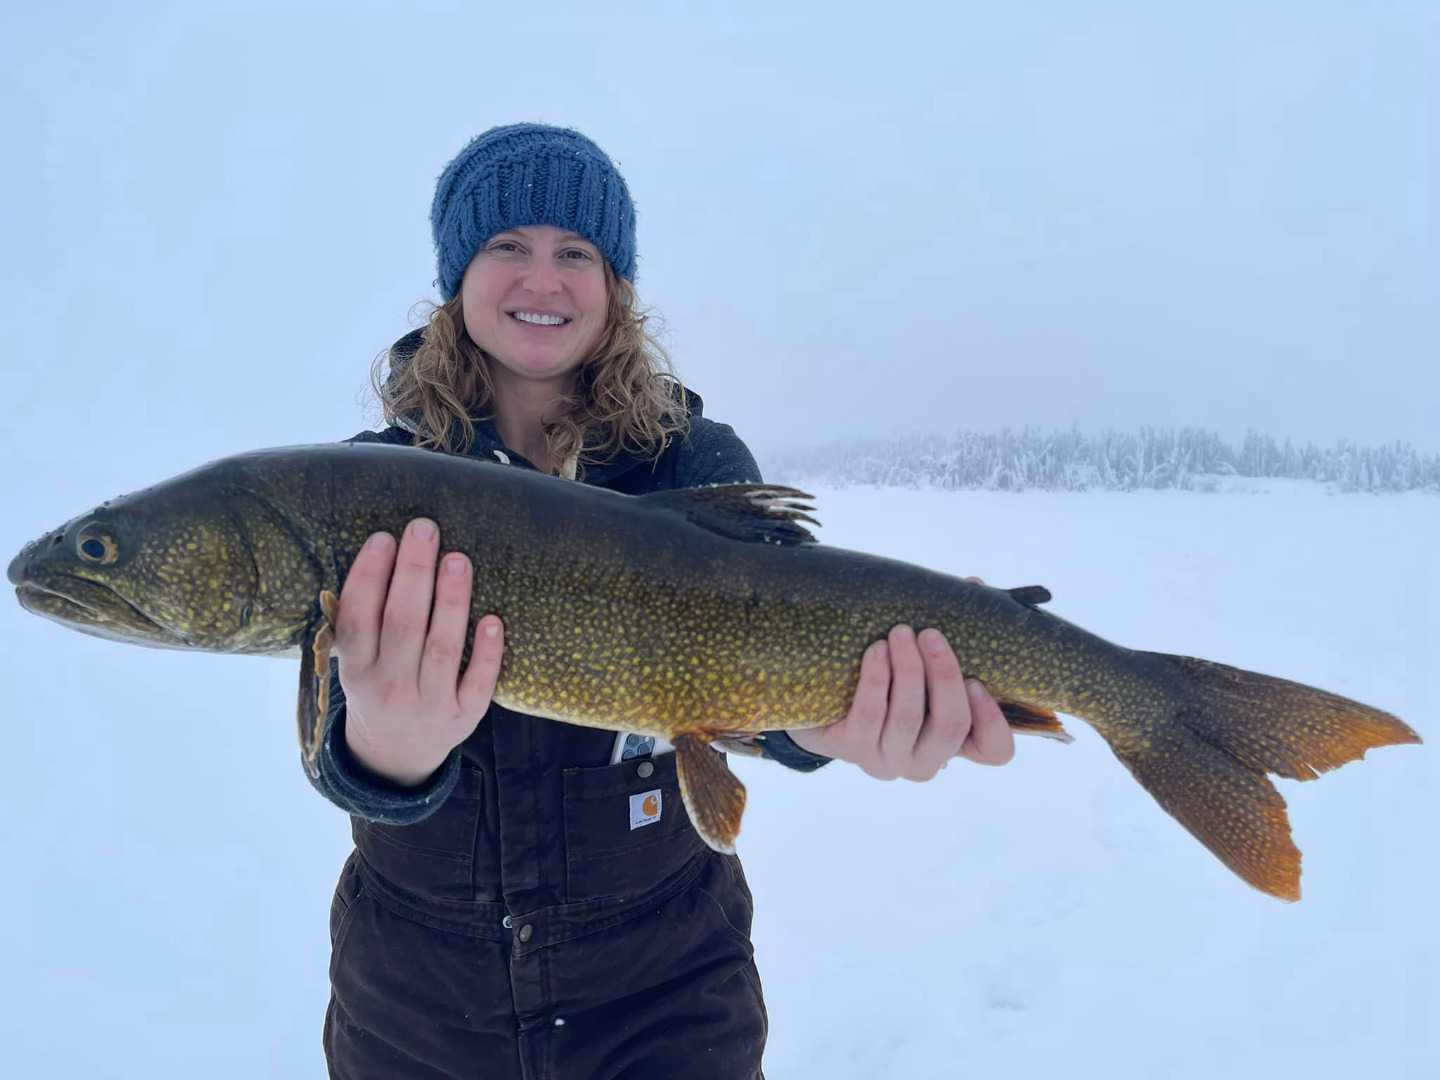 Plenty of lakers and burbot yesterday!